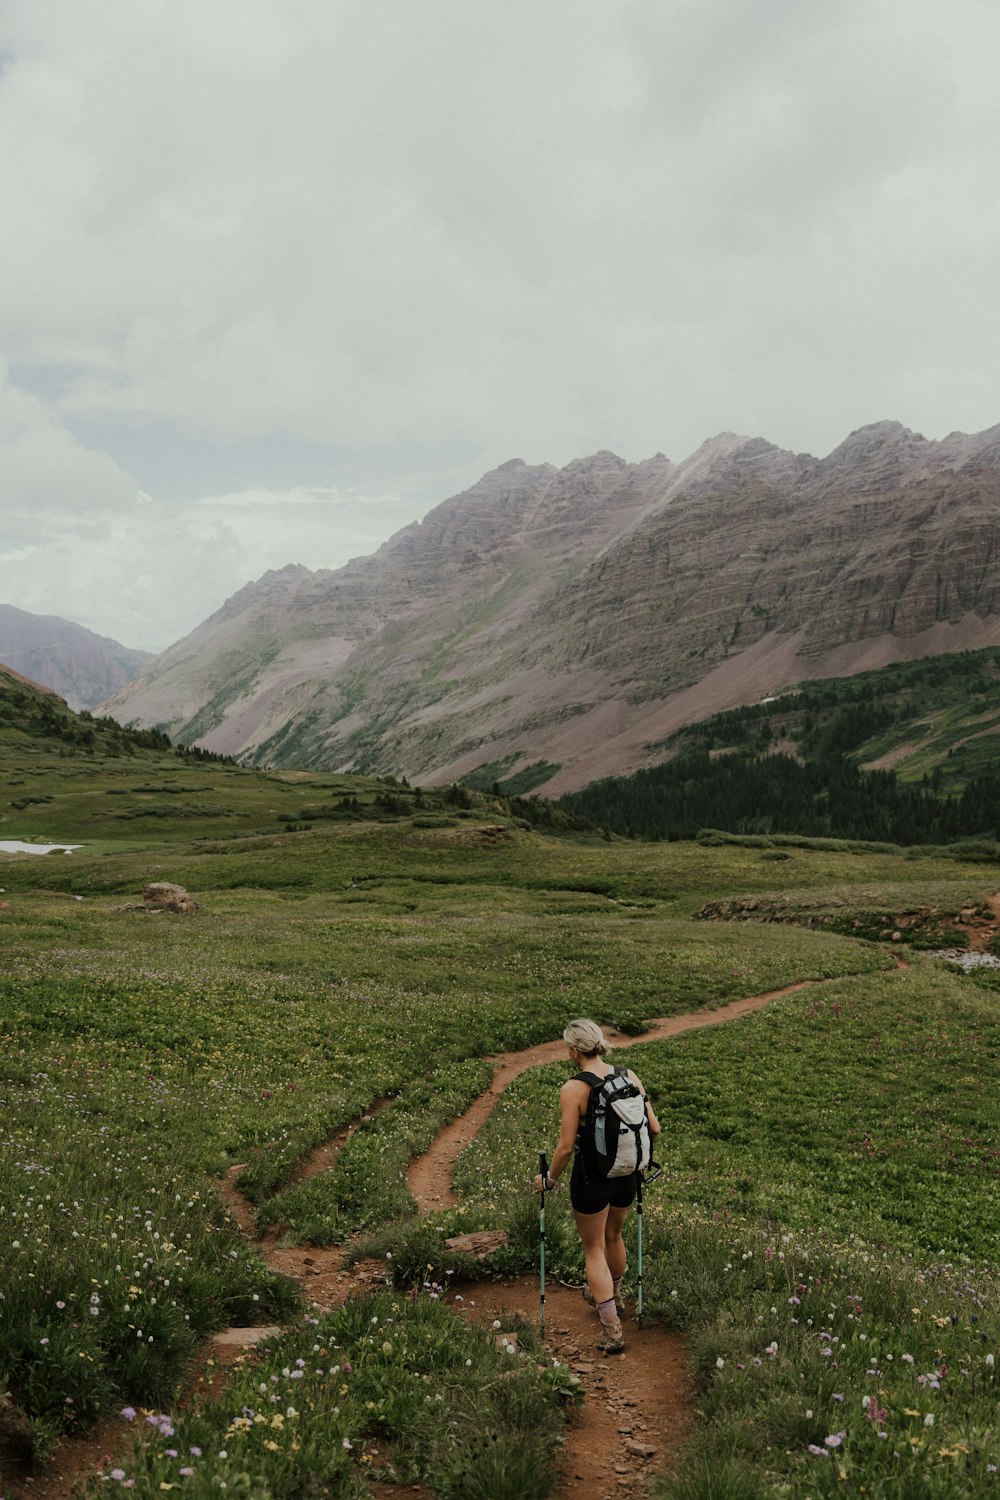 a person walking on a trail in a grassy area with mountains in the background